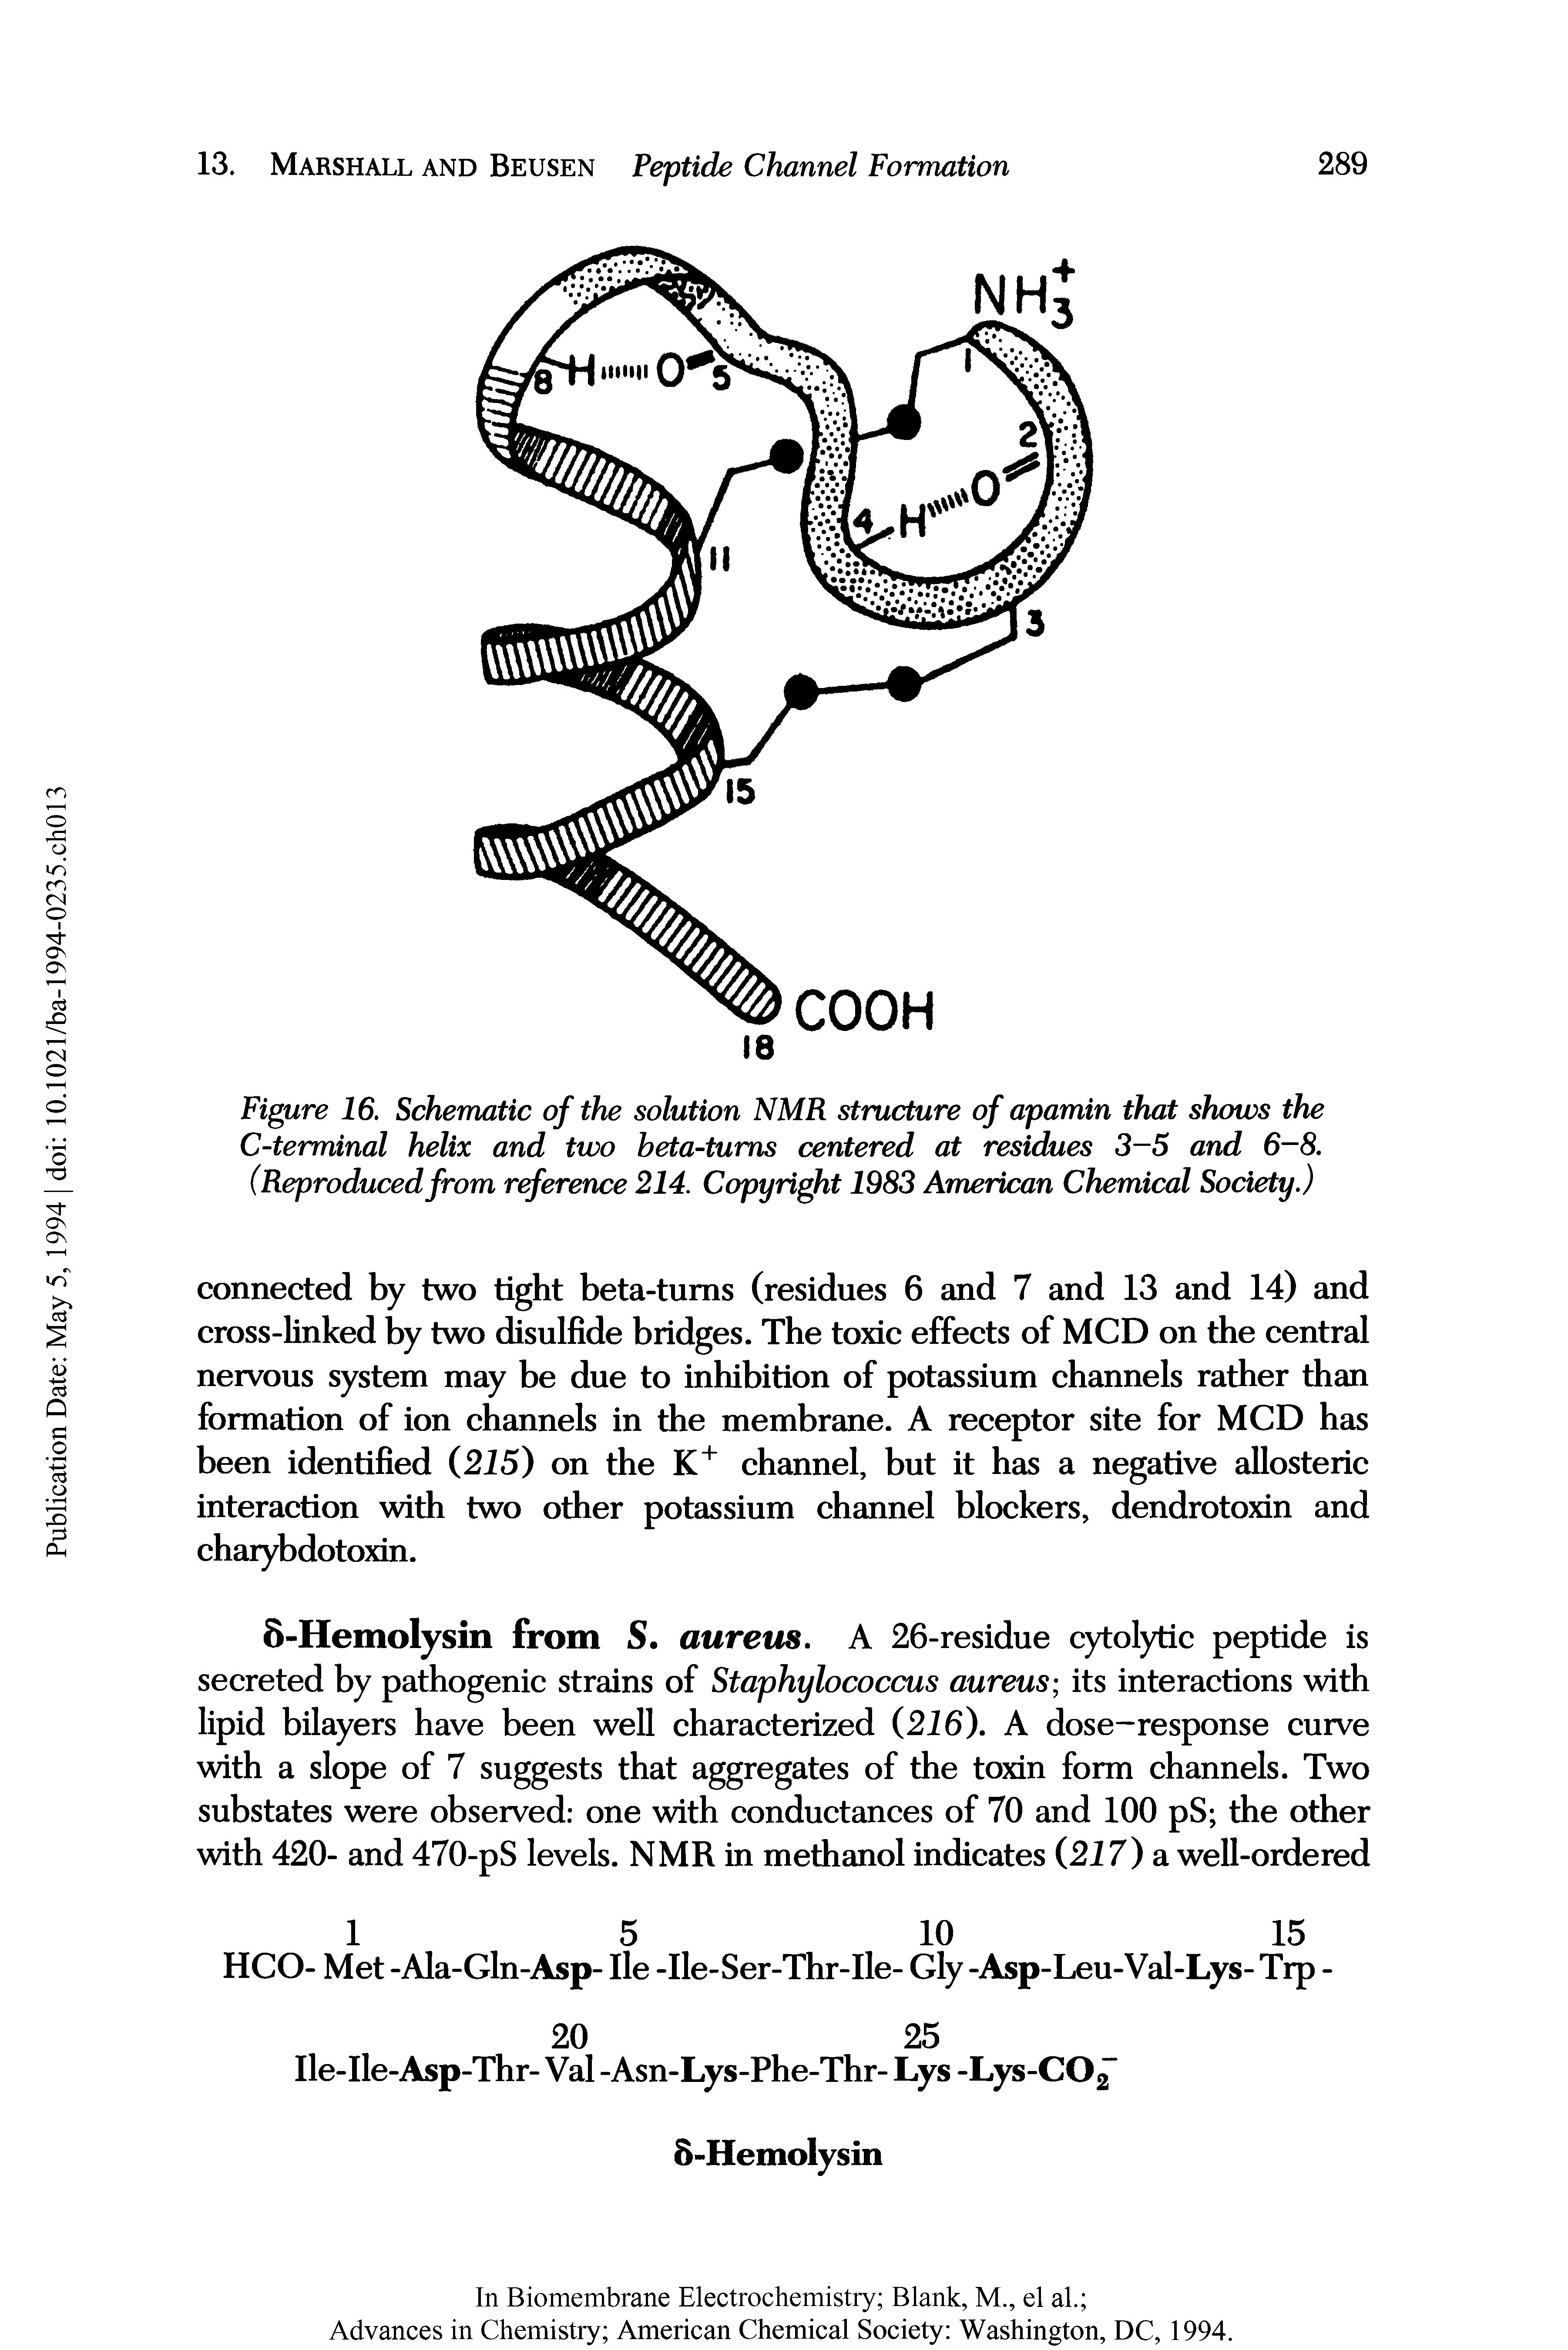 Figure 16. Schematic of the solution NMR structure of apamin that shows the C-terminal helix and two beta-turns centered at residues 3-5 and 6-8. (Reproduced from reference 214. Copyright 1983 American Chemical Society.)...